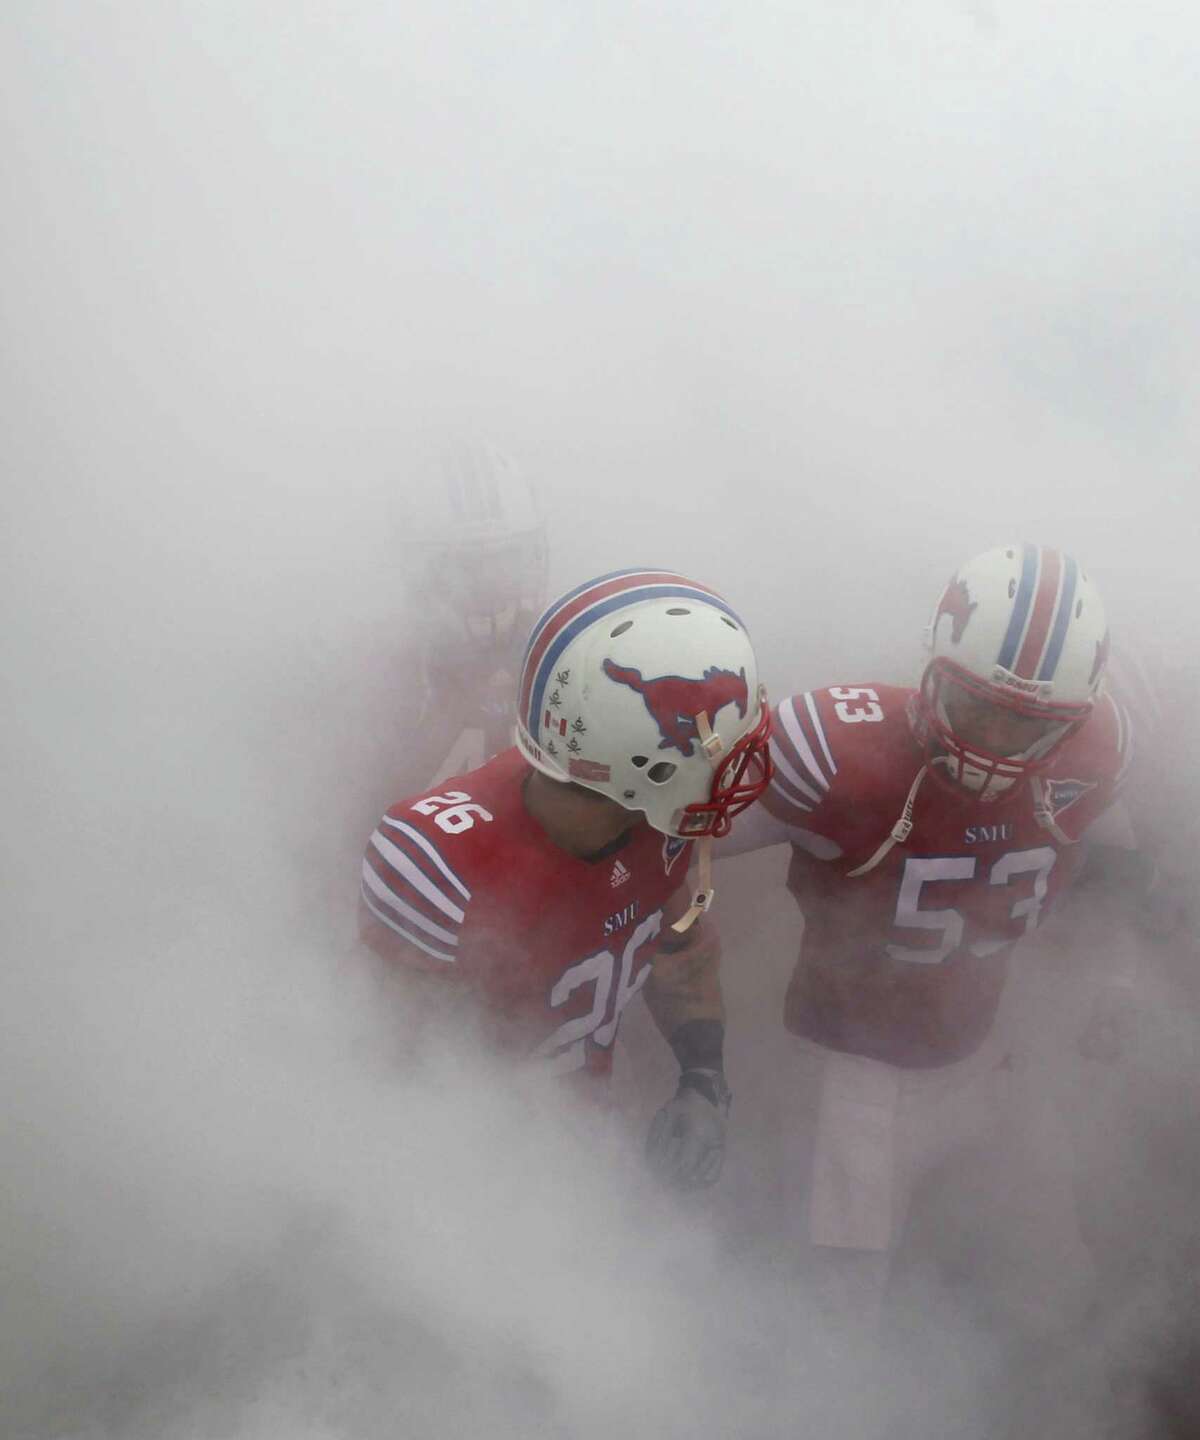 Hawaii Bowl, Dec. 24, SMU vs. Fresno State: SMU senior deep snapper Mark Voosen (53) is from New Braunfels Canyon.Caption: MU DB Brett Haness (26) and DS Mark Voosen (53) wait in the smoke to take the field before the SMU Mustangs vs. the Rice Owls college football game at Gerald J. Ford Stadium in Dallas on Saturday, November 26, 2011. (Louis DeLuca/The Dallas Morning News)